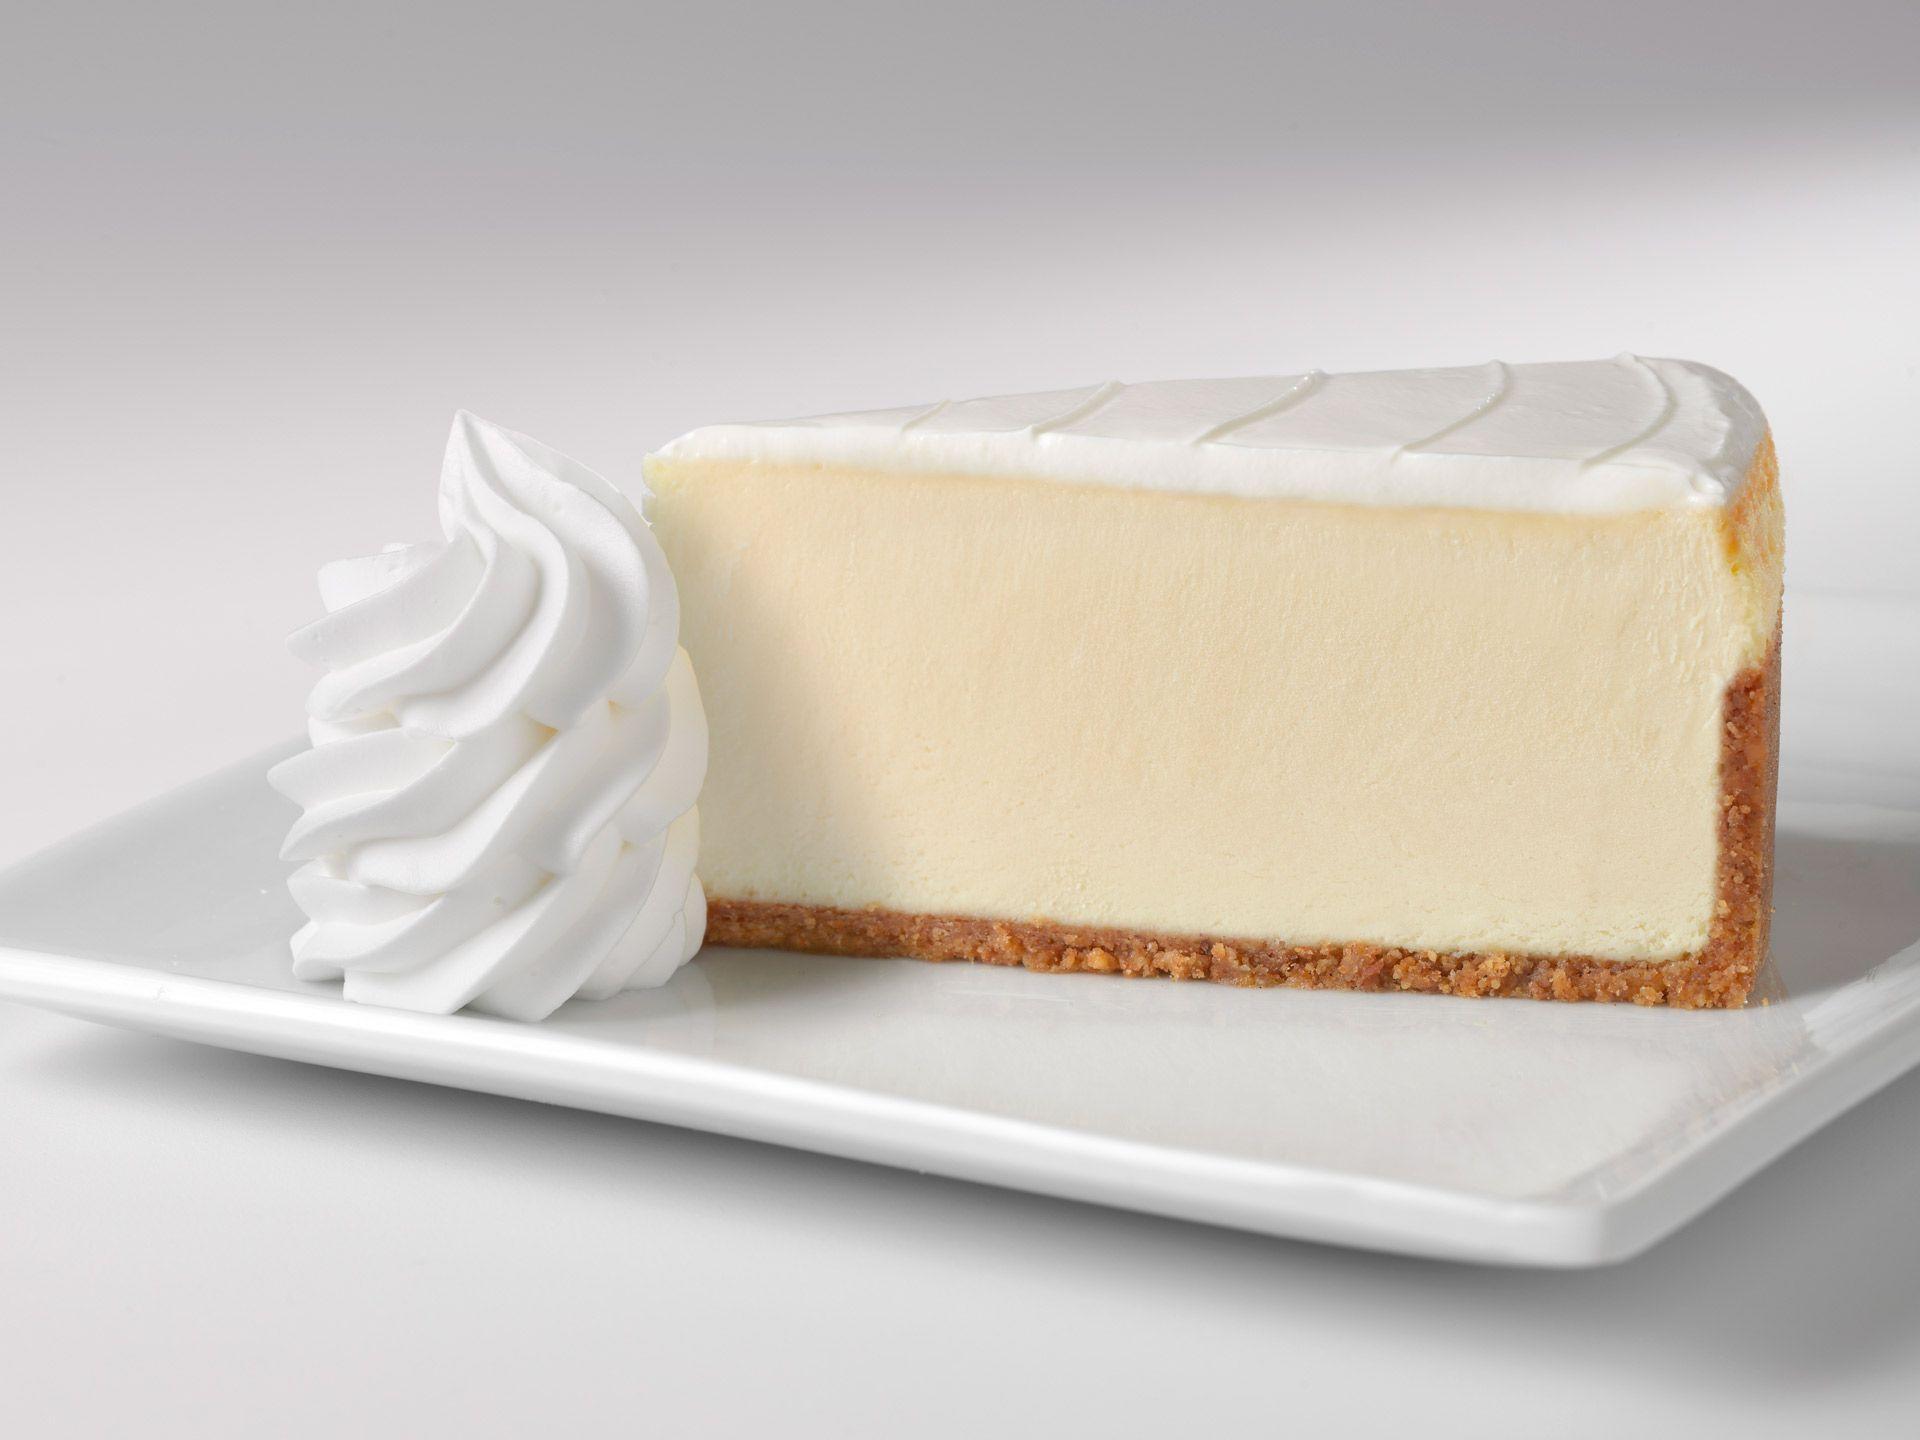 Why Cheesecake Factory Inc Stock Crumbled Today - The Motley Fool